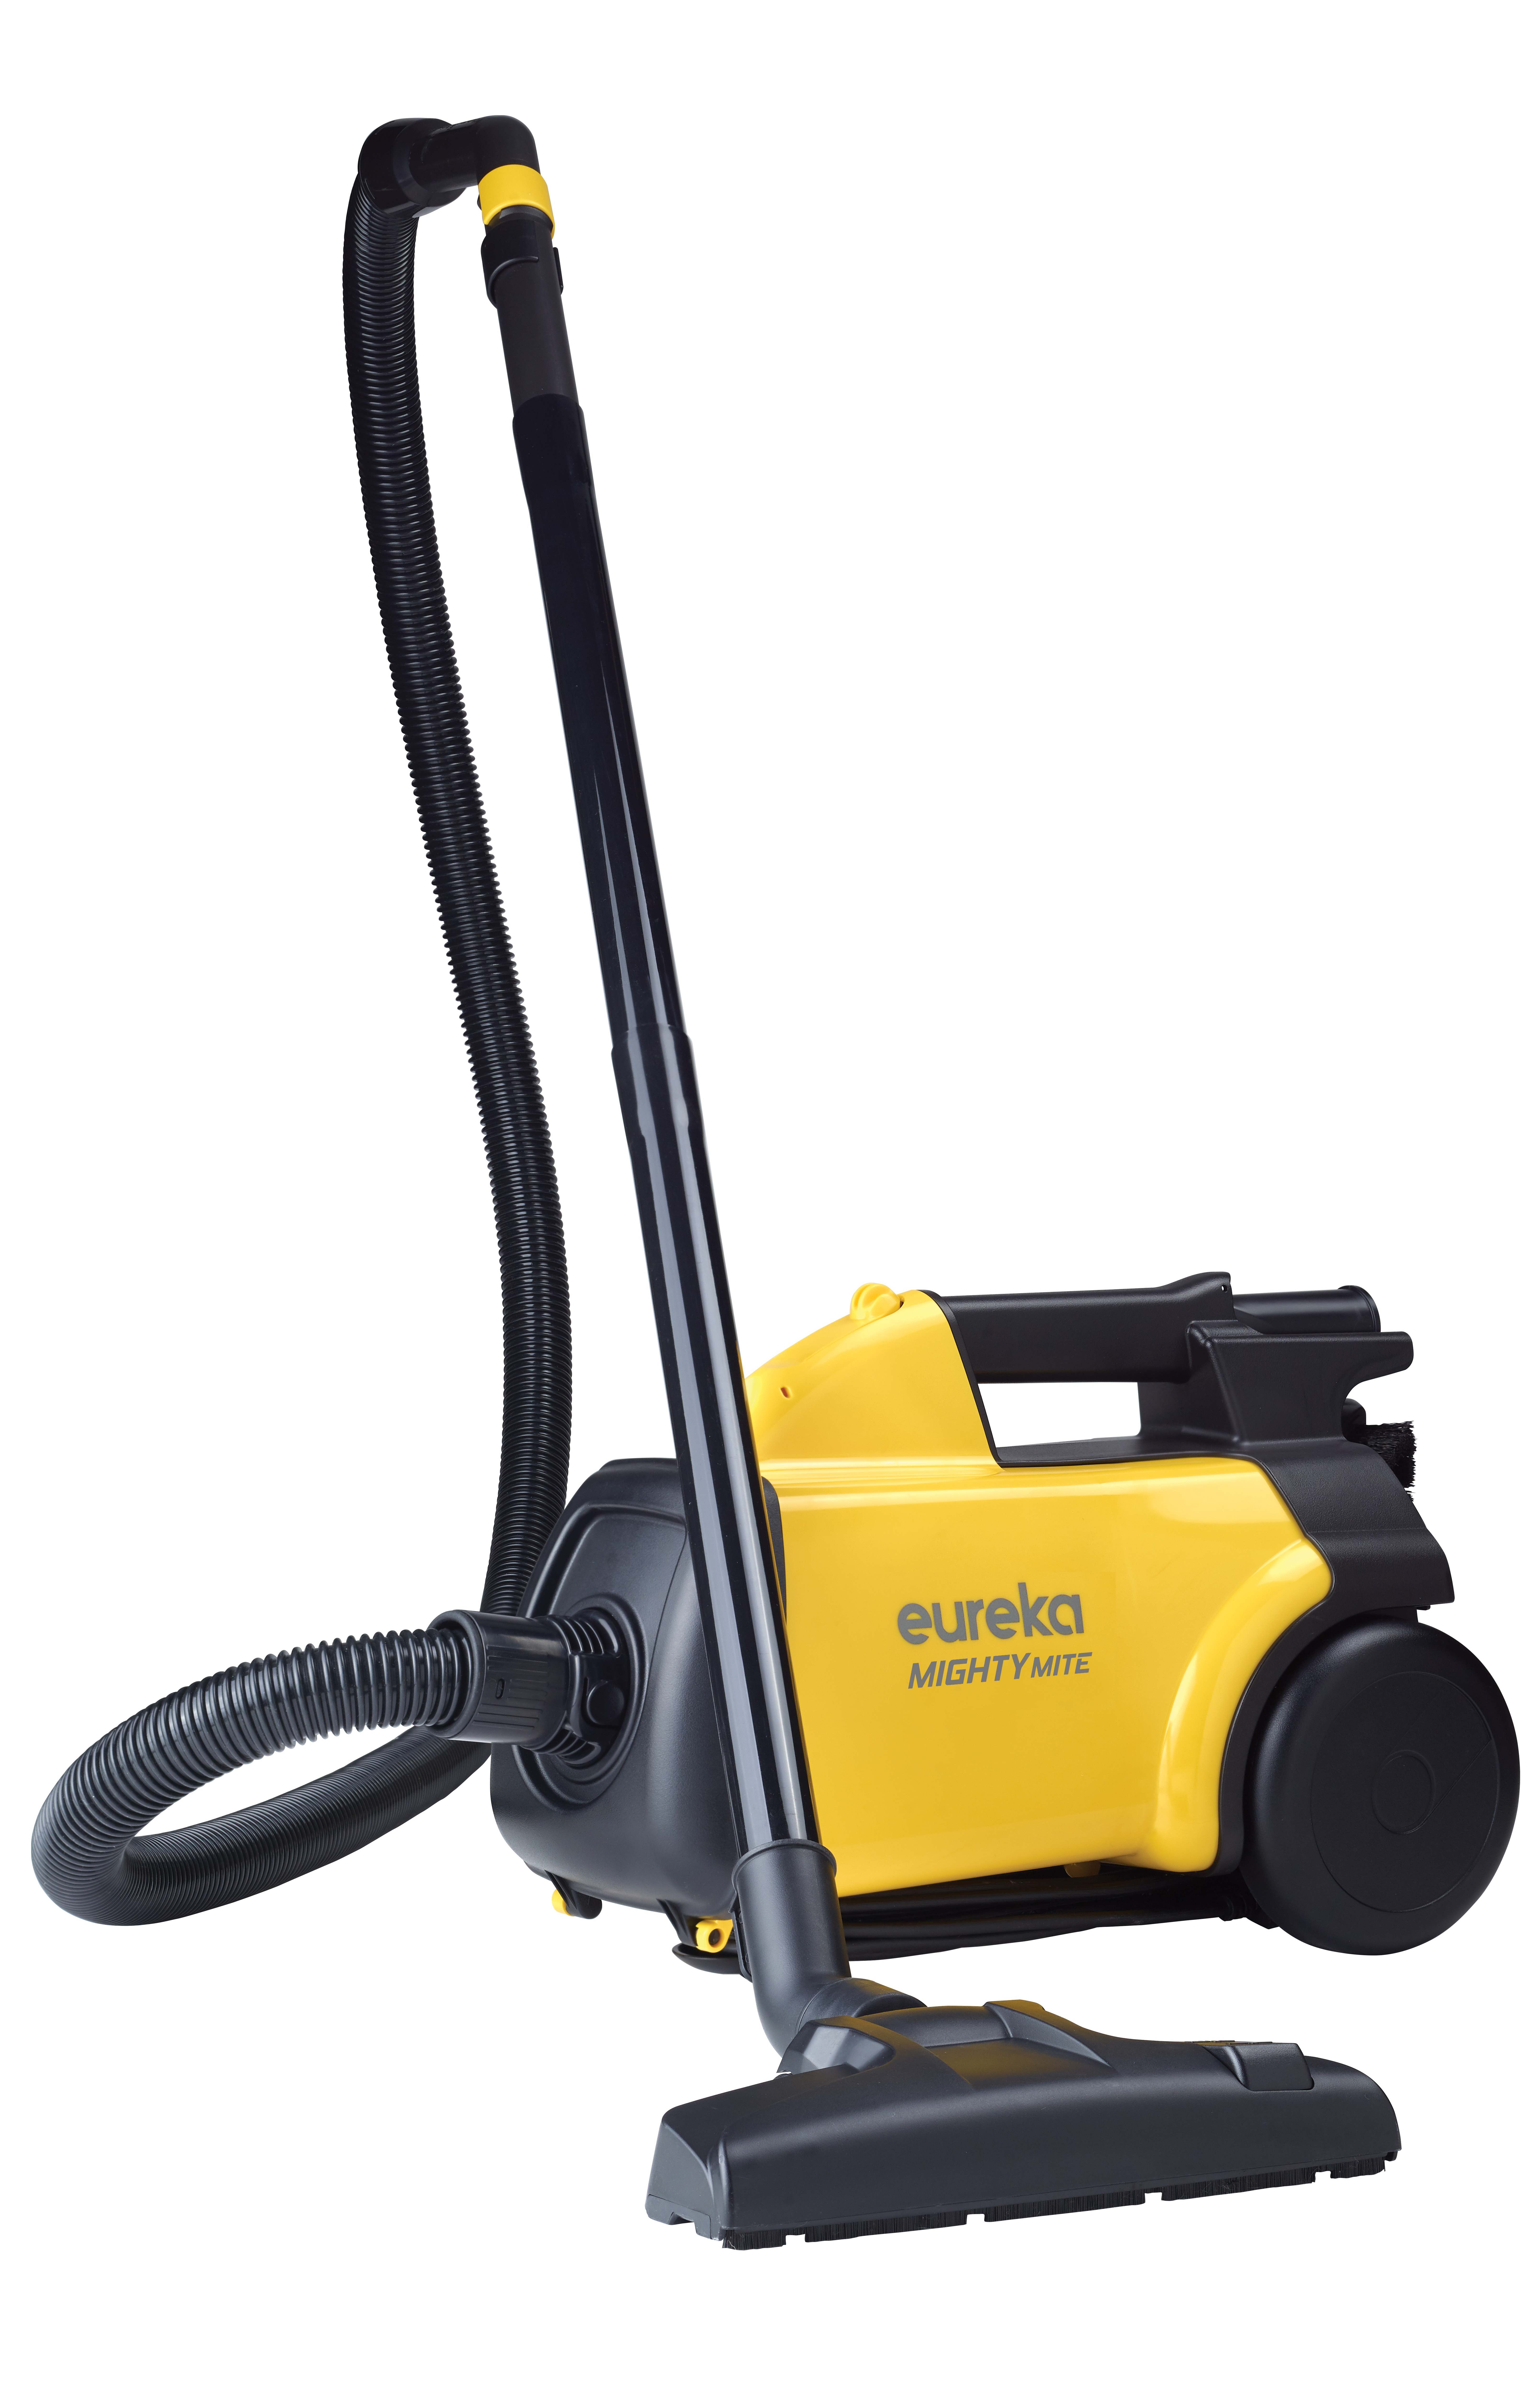 Eureka Mighty Mite Bagged Canister Vacuum, 3670G - image 1 of 17